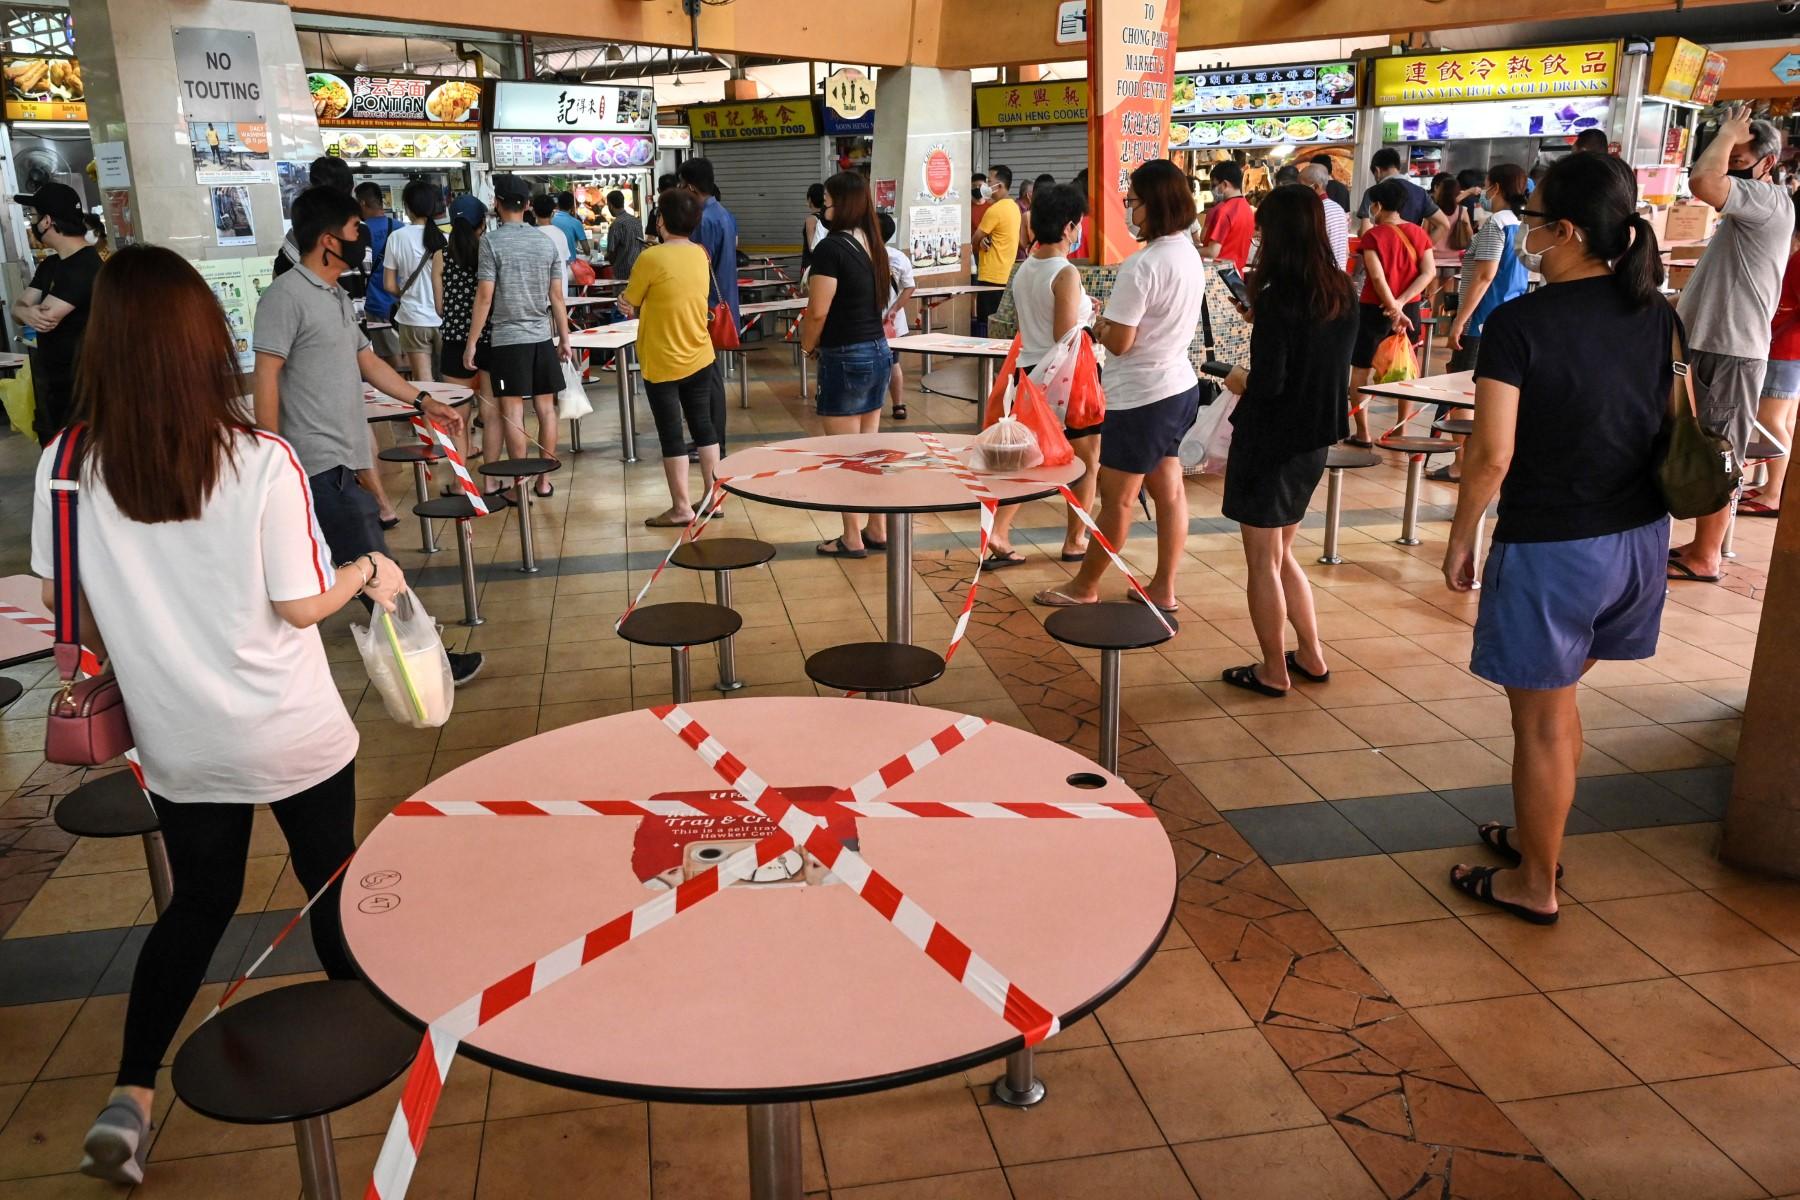 People queue to buy food as takeaway orders, as tables and chairs are cordoned off to prevent people from dining at a hawker food centre in Singapore on May 16, 2021. Photo: AFP